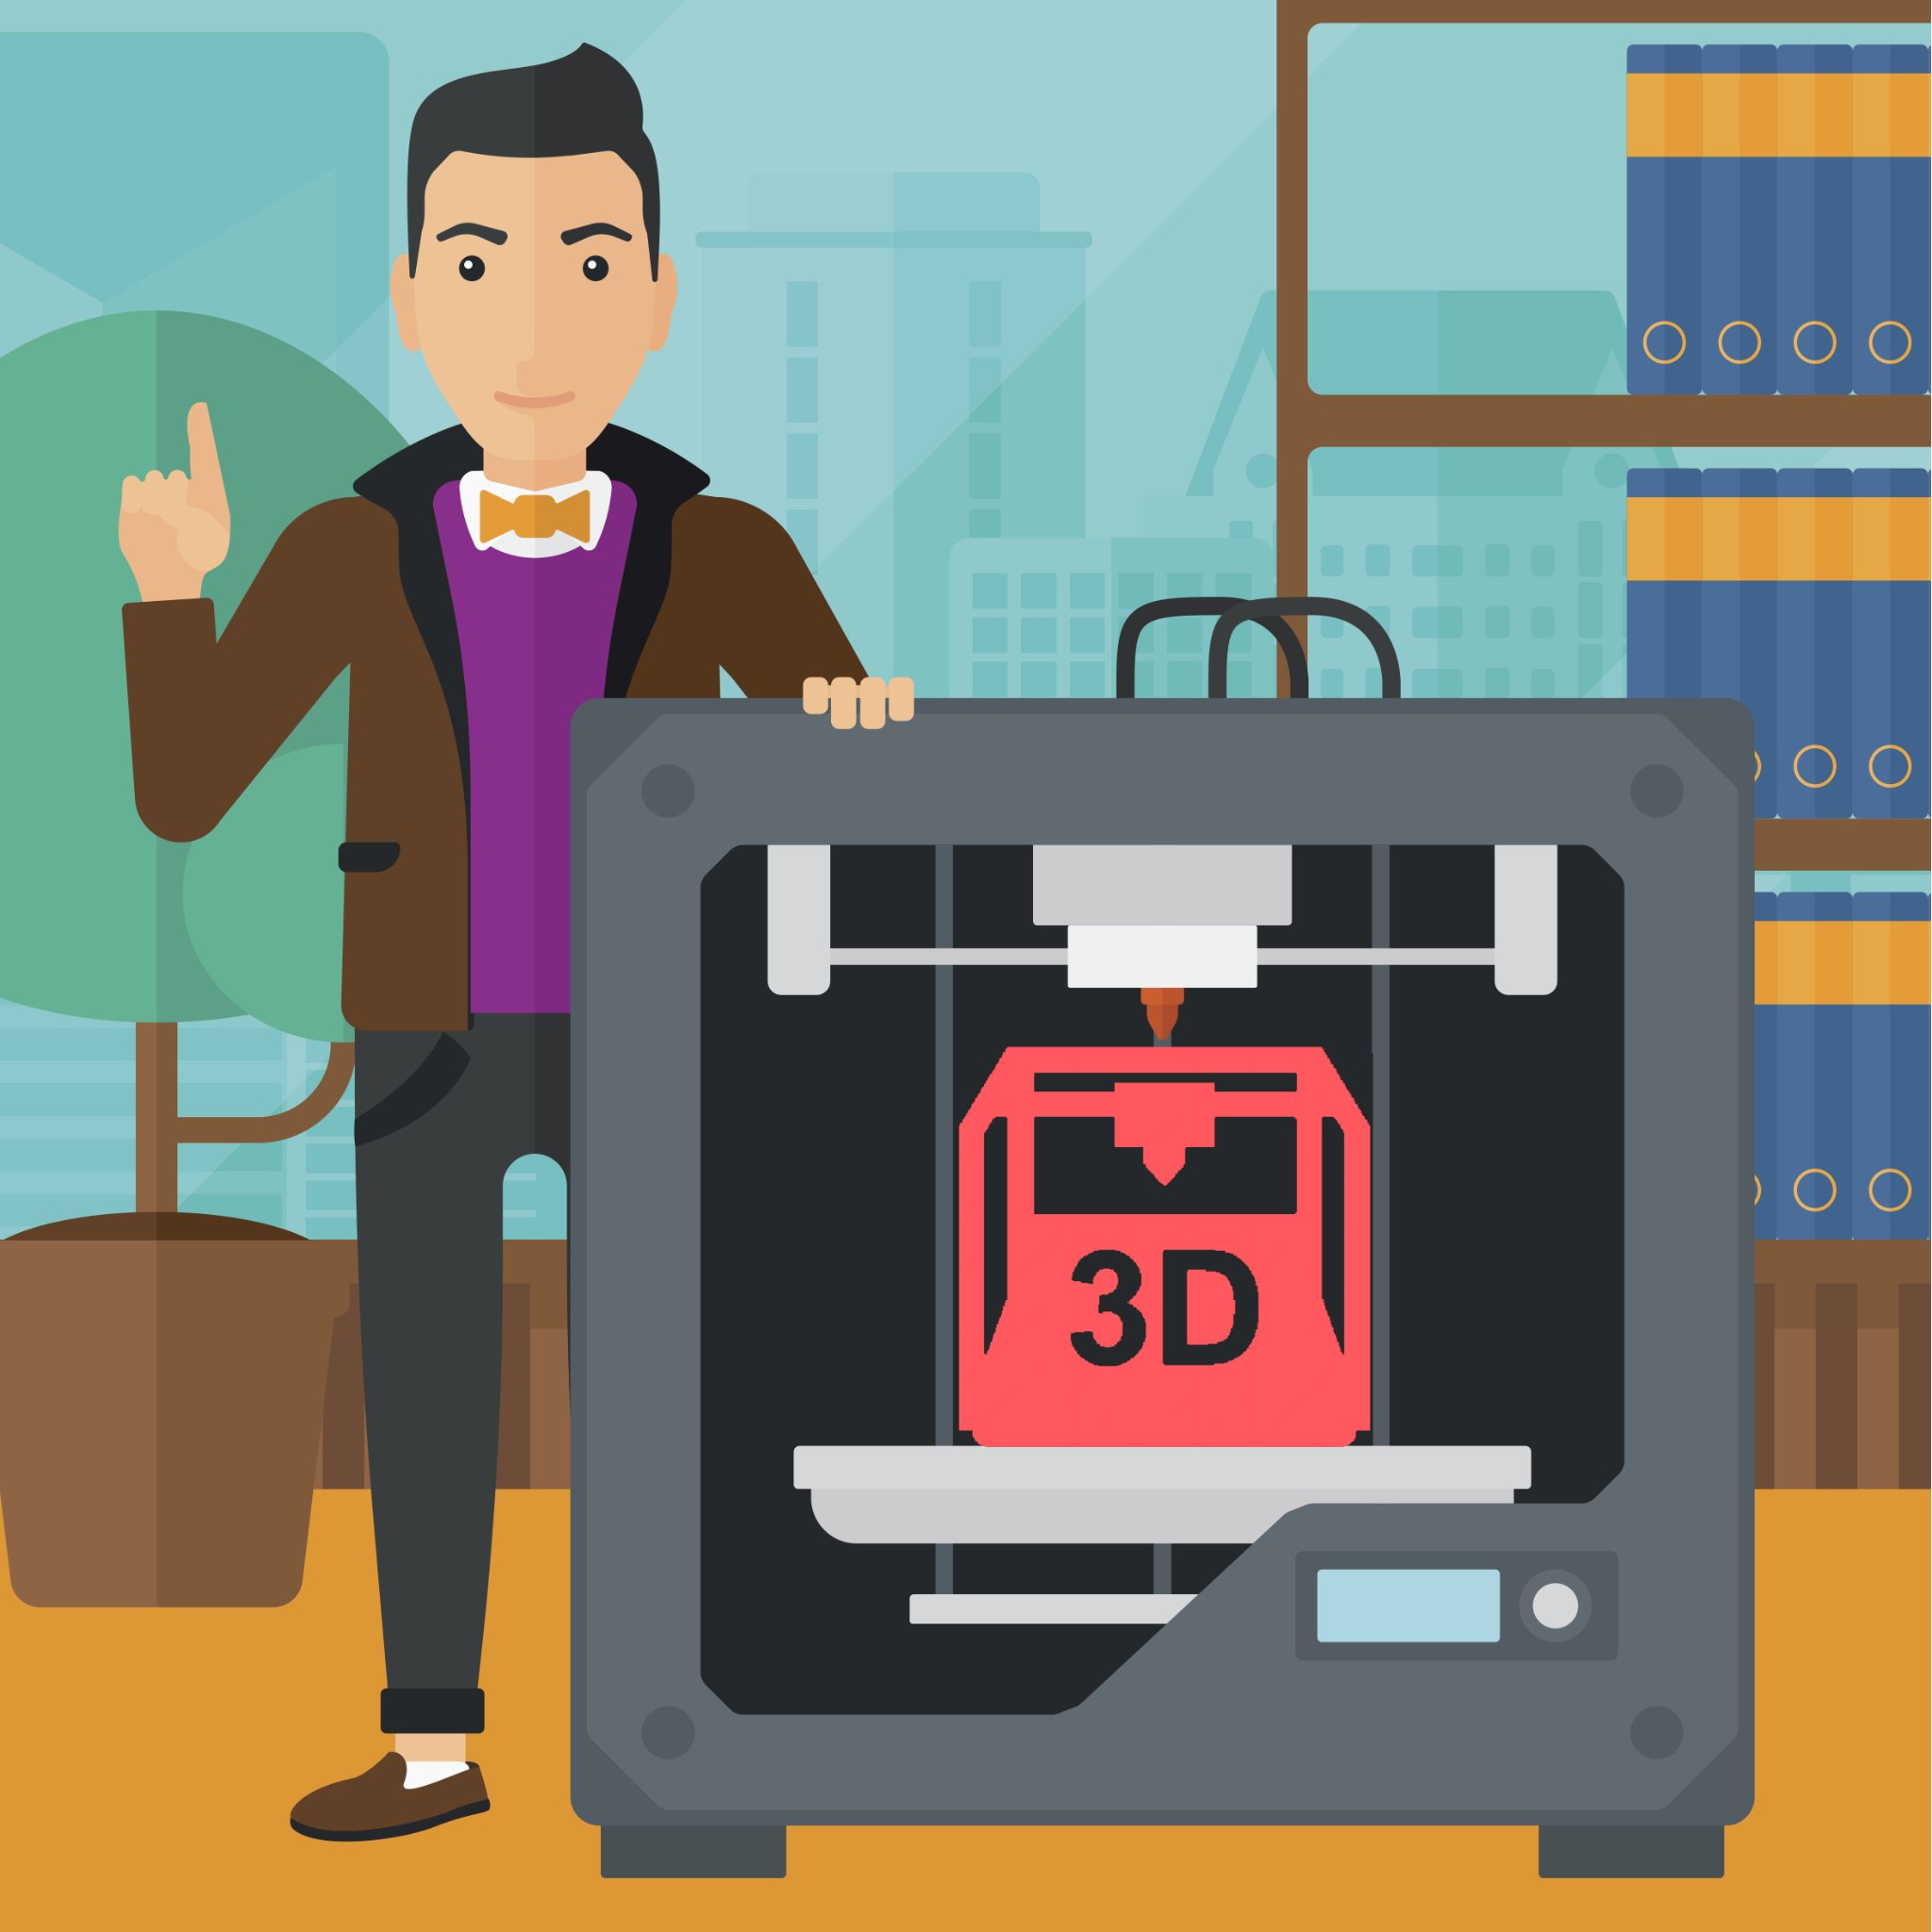 Fully planned 3D printing curriculum for teachers and students. Over 280 resources mapped to U.K. USA and Australian education standards.